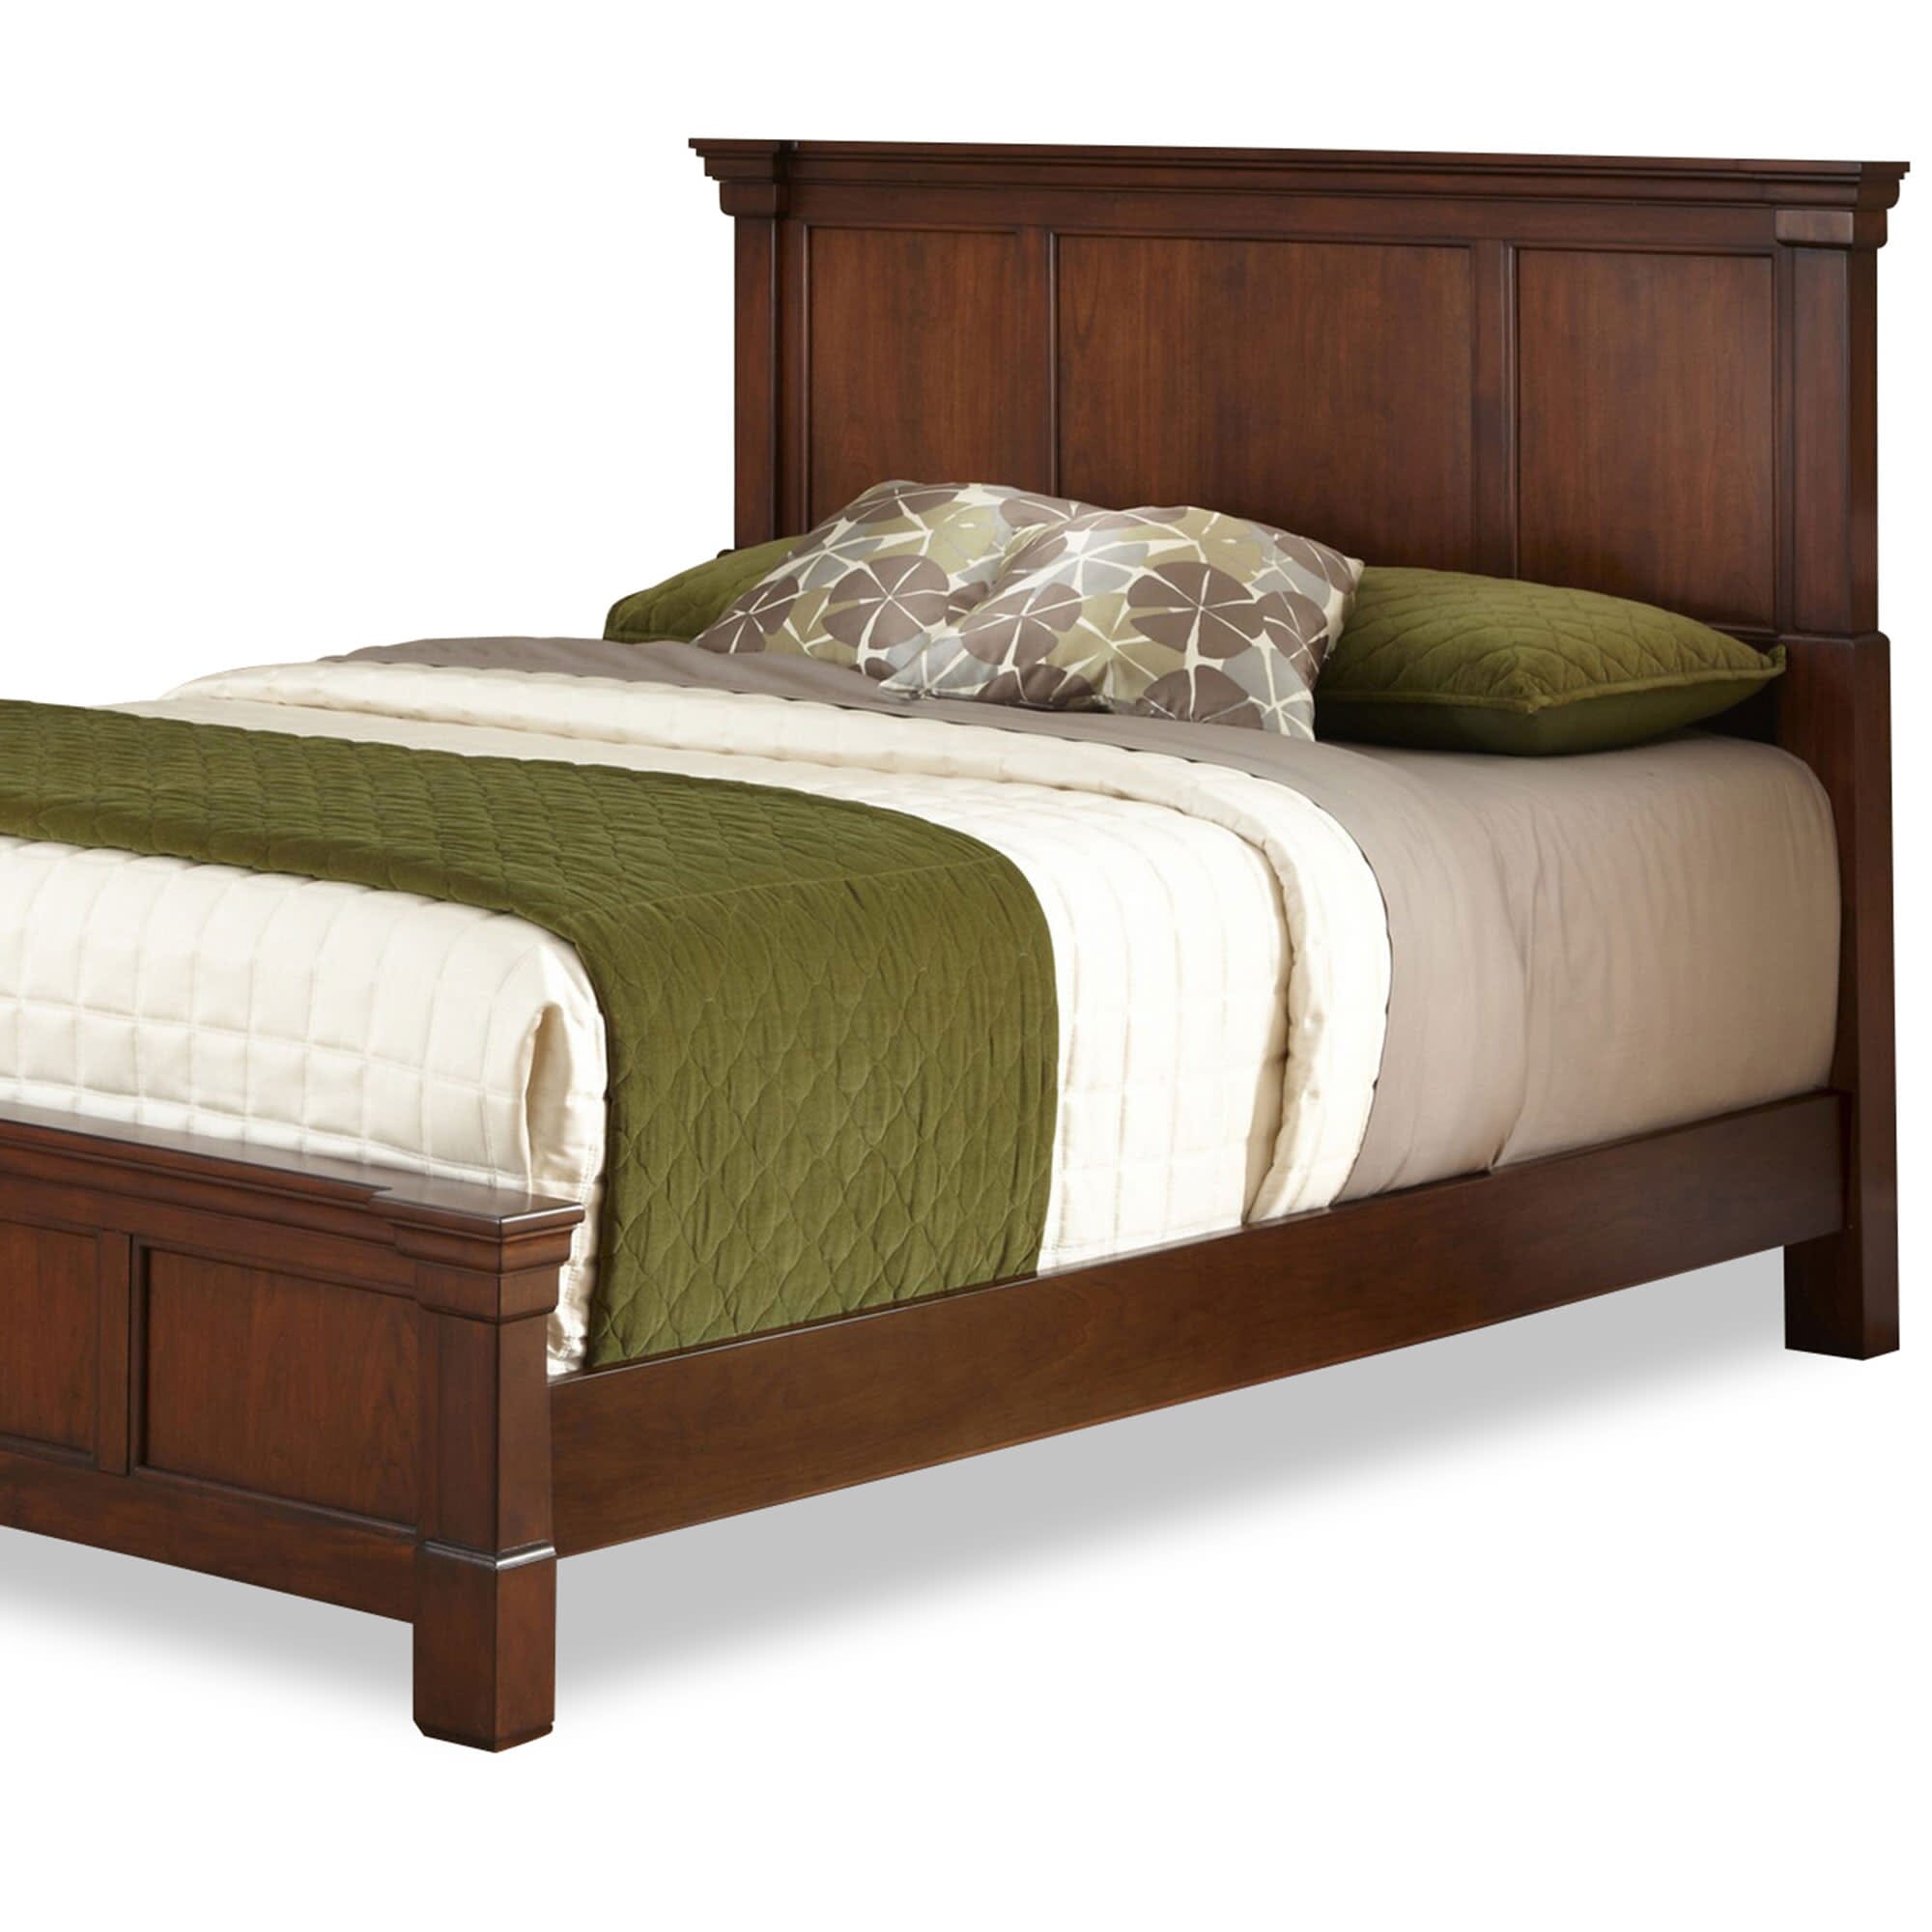 Traditional King Bed By Aspen King Bed Aspen